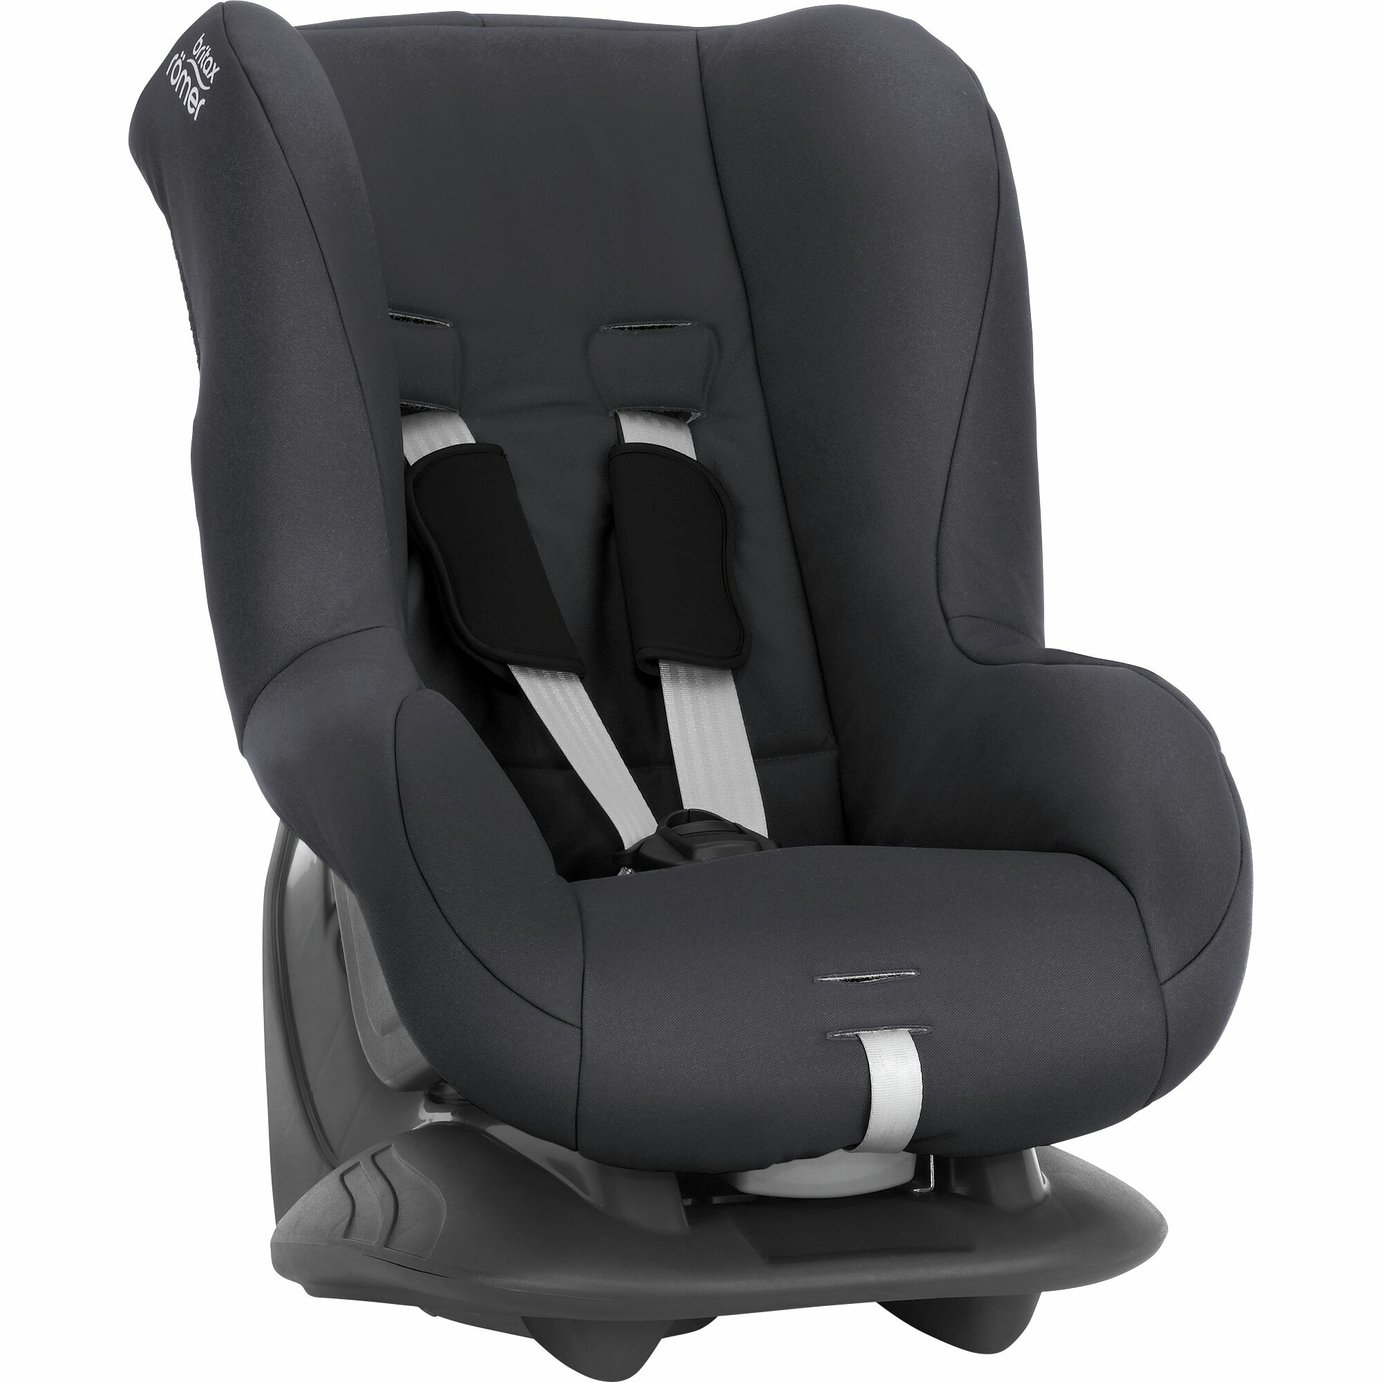 Britax Eclipse Group 1 Car Seat Review